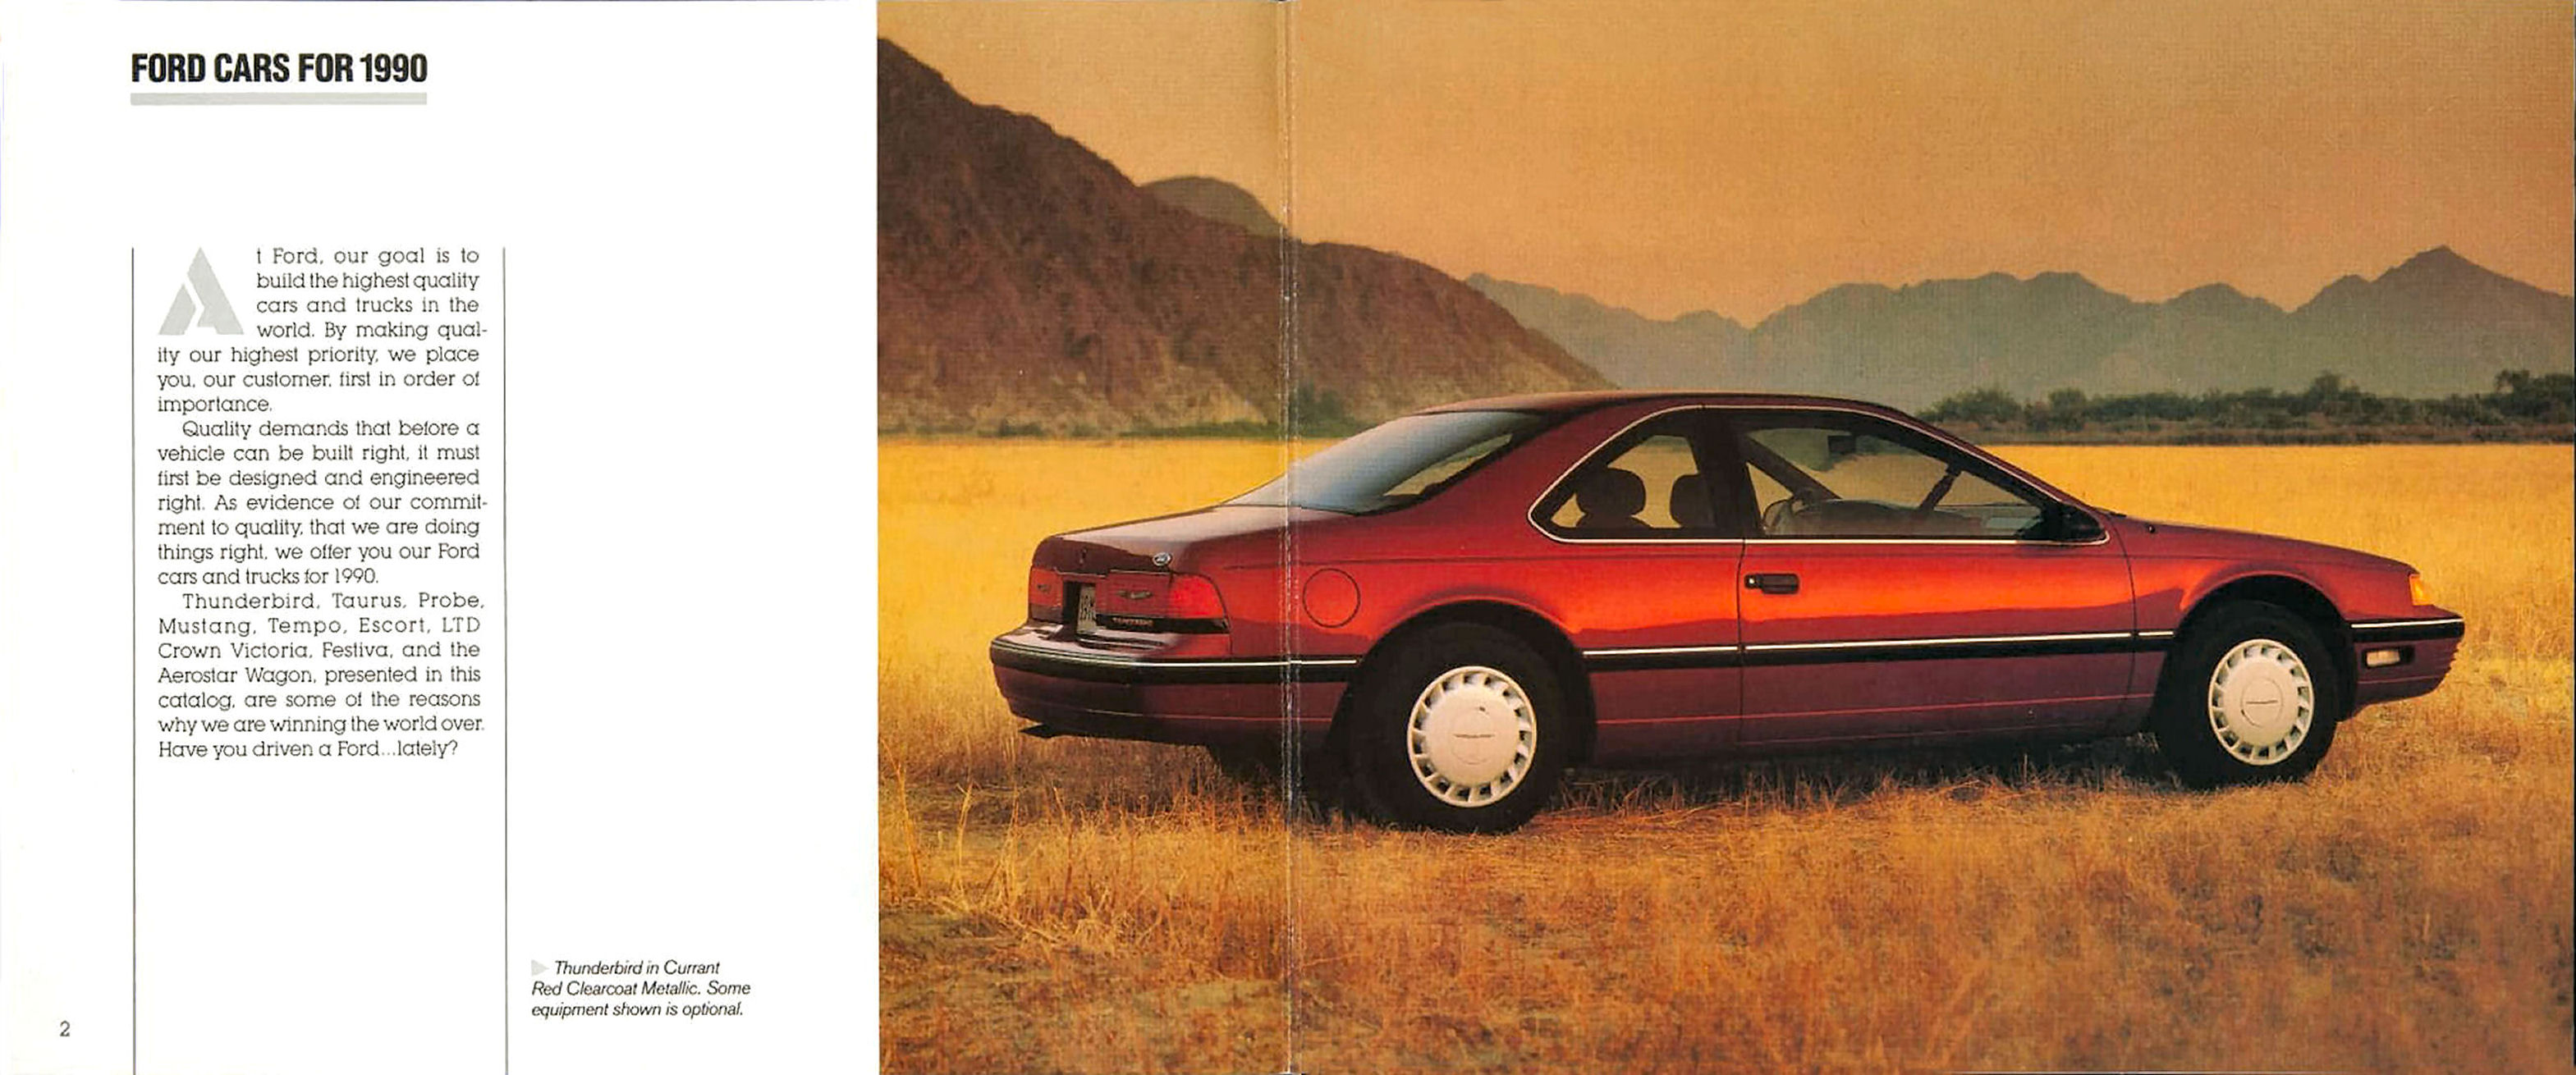 1990_Ford_Cars-02-03